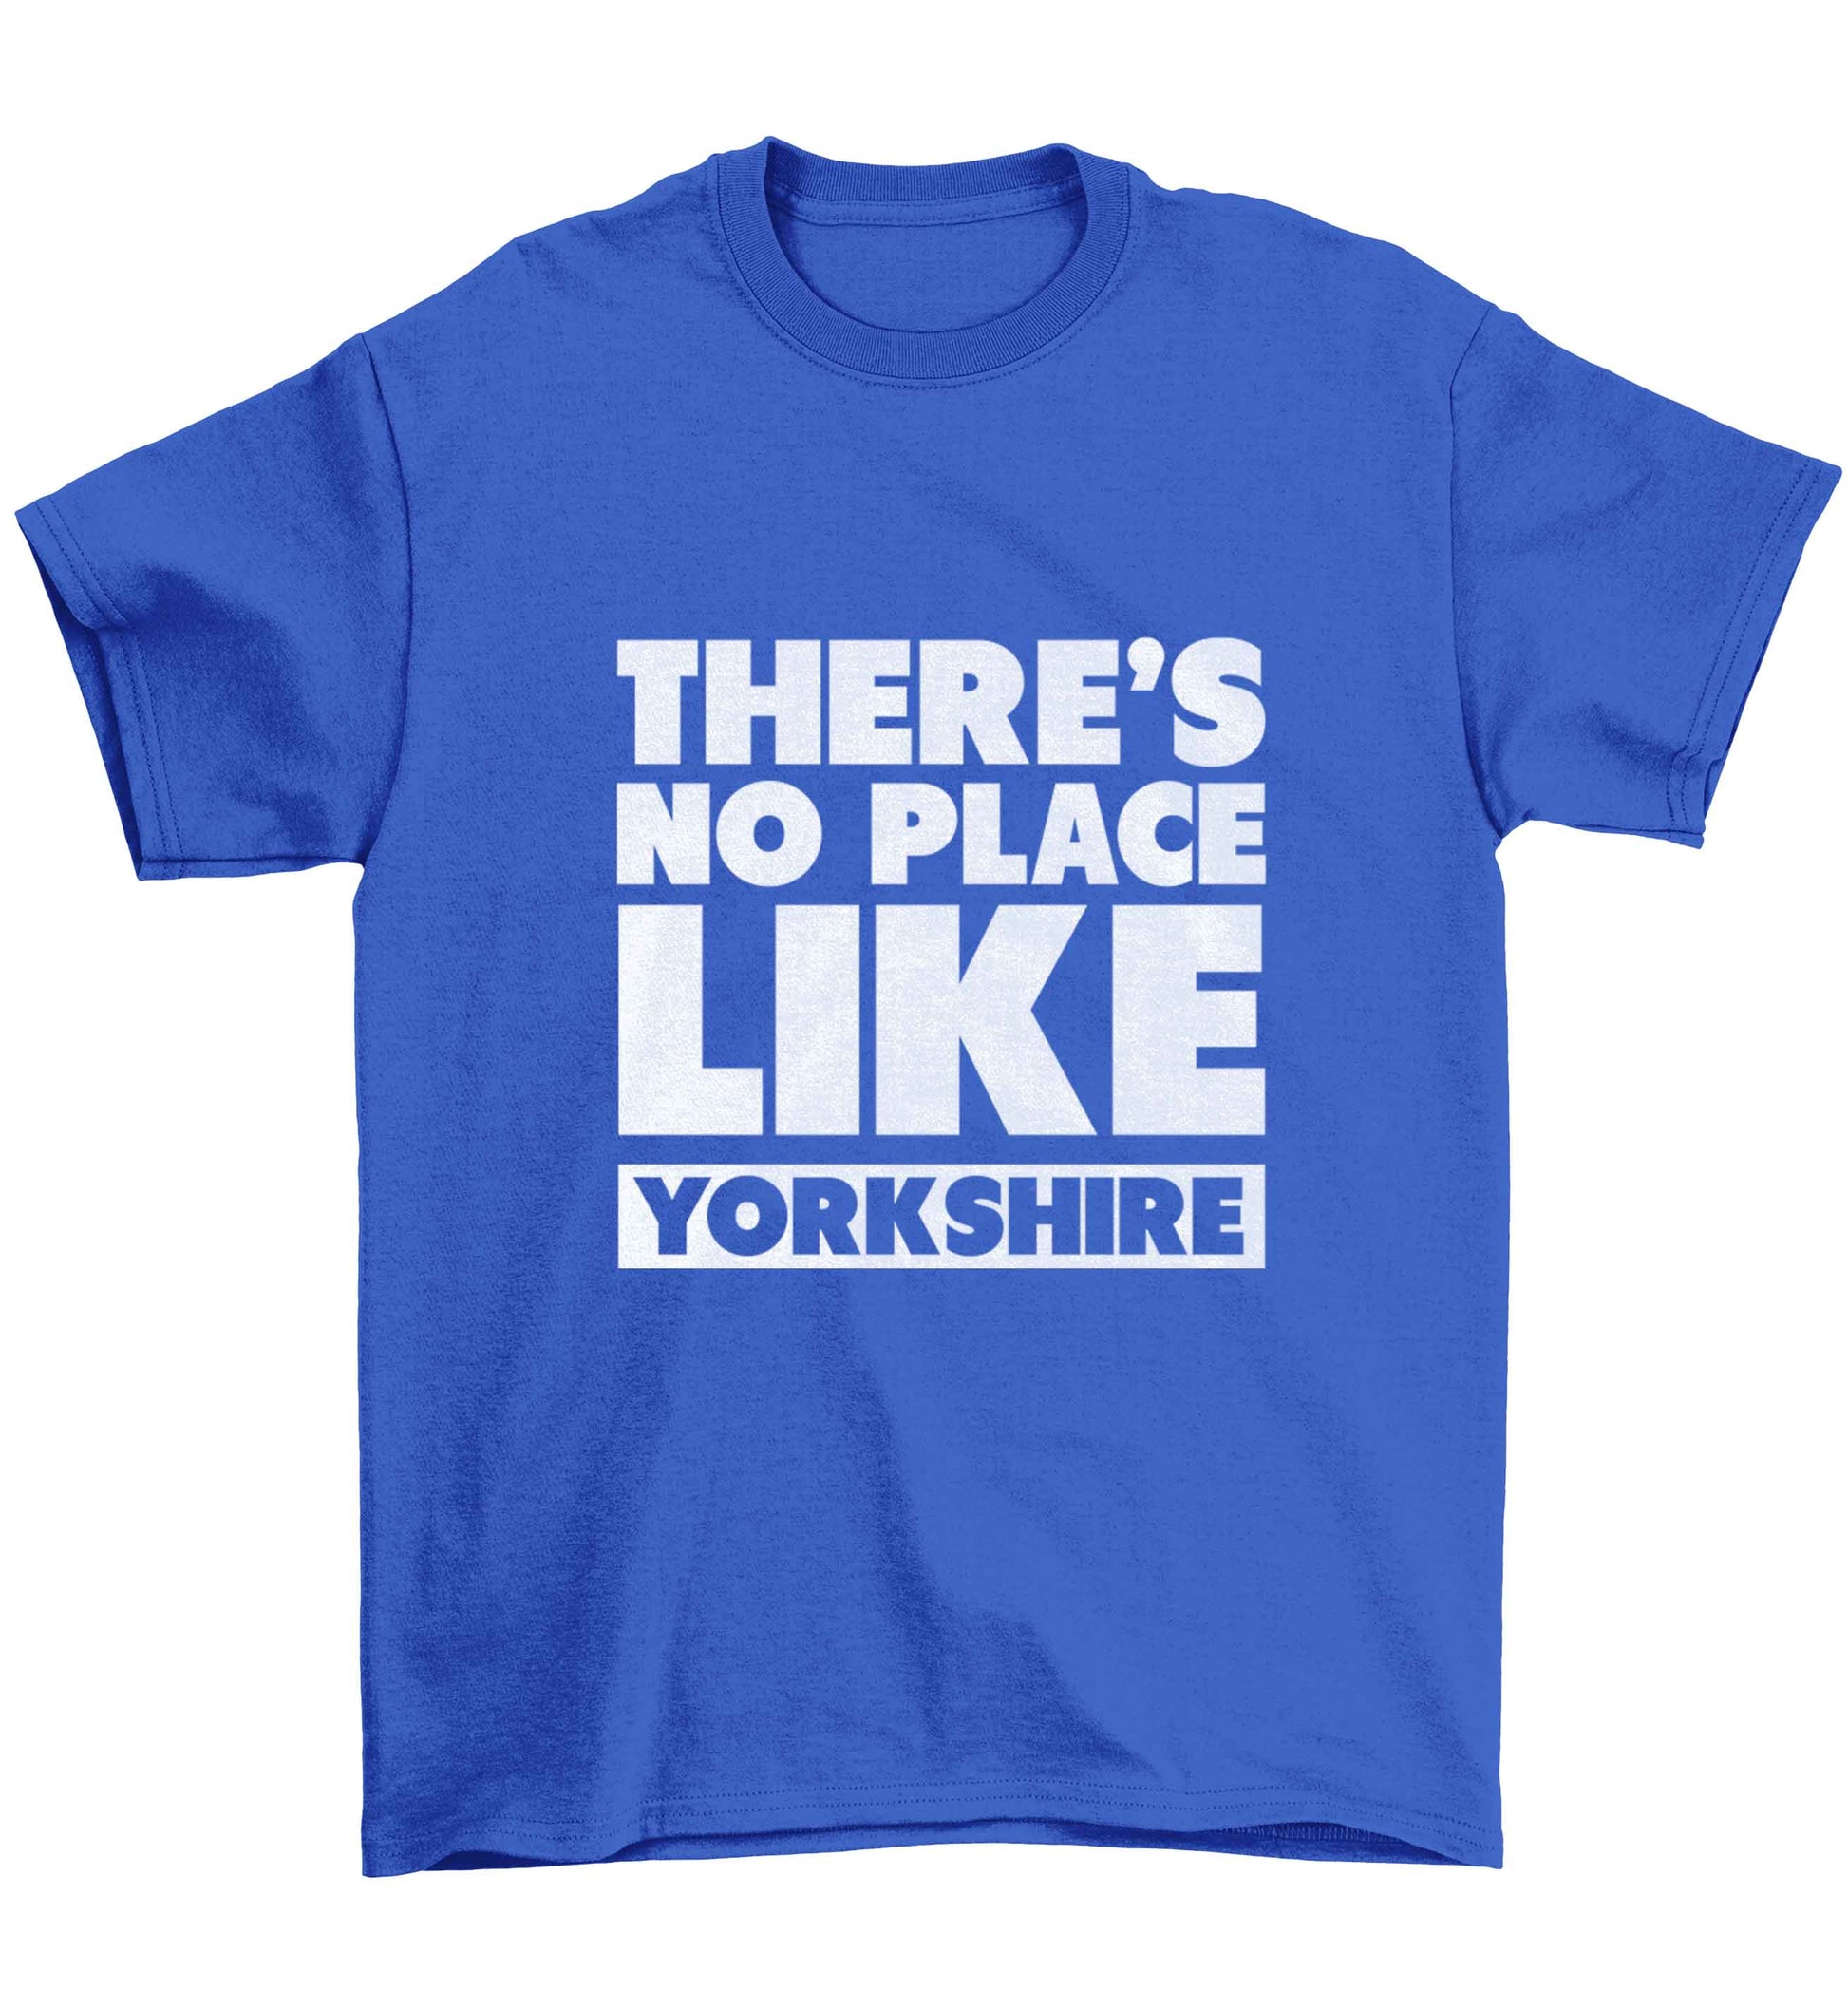 There's no place like Yorkshire Children's blue Tshirt 12-13 Years